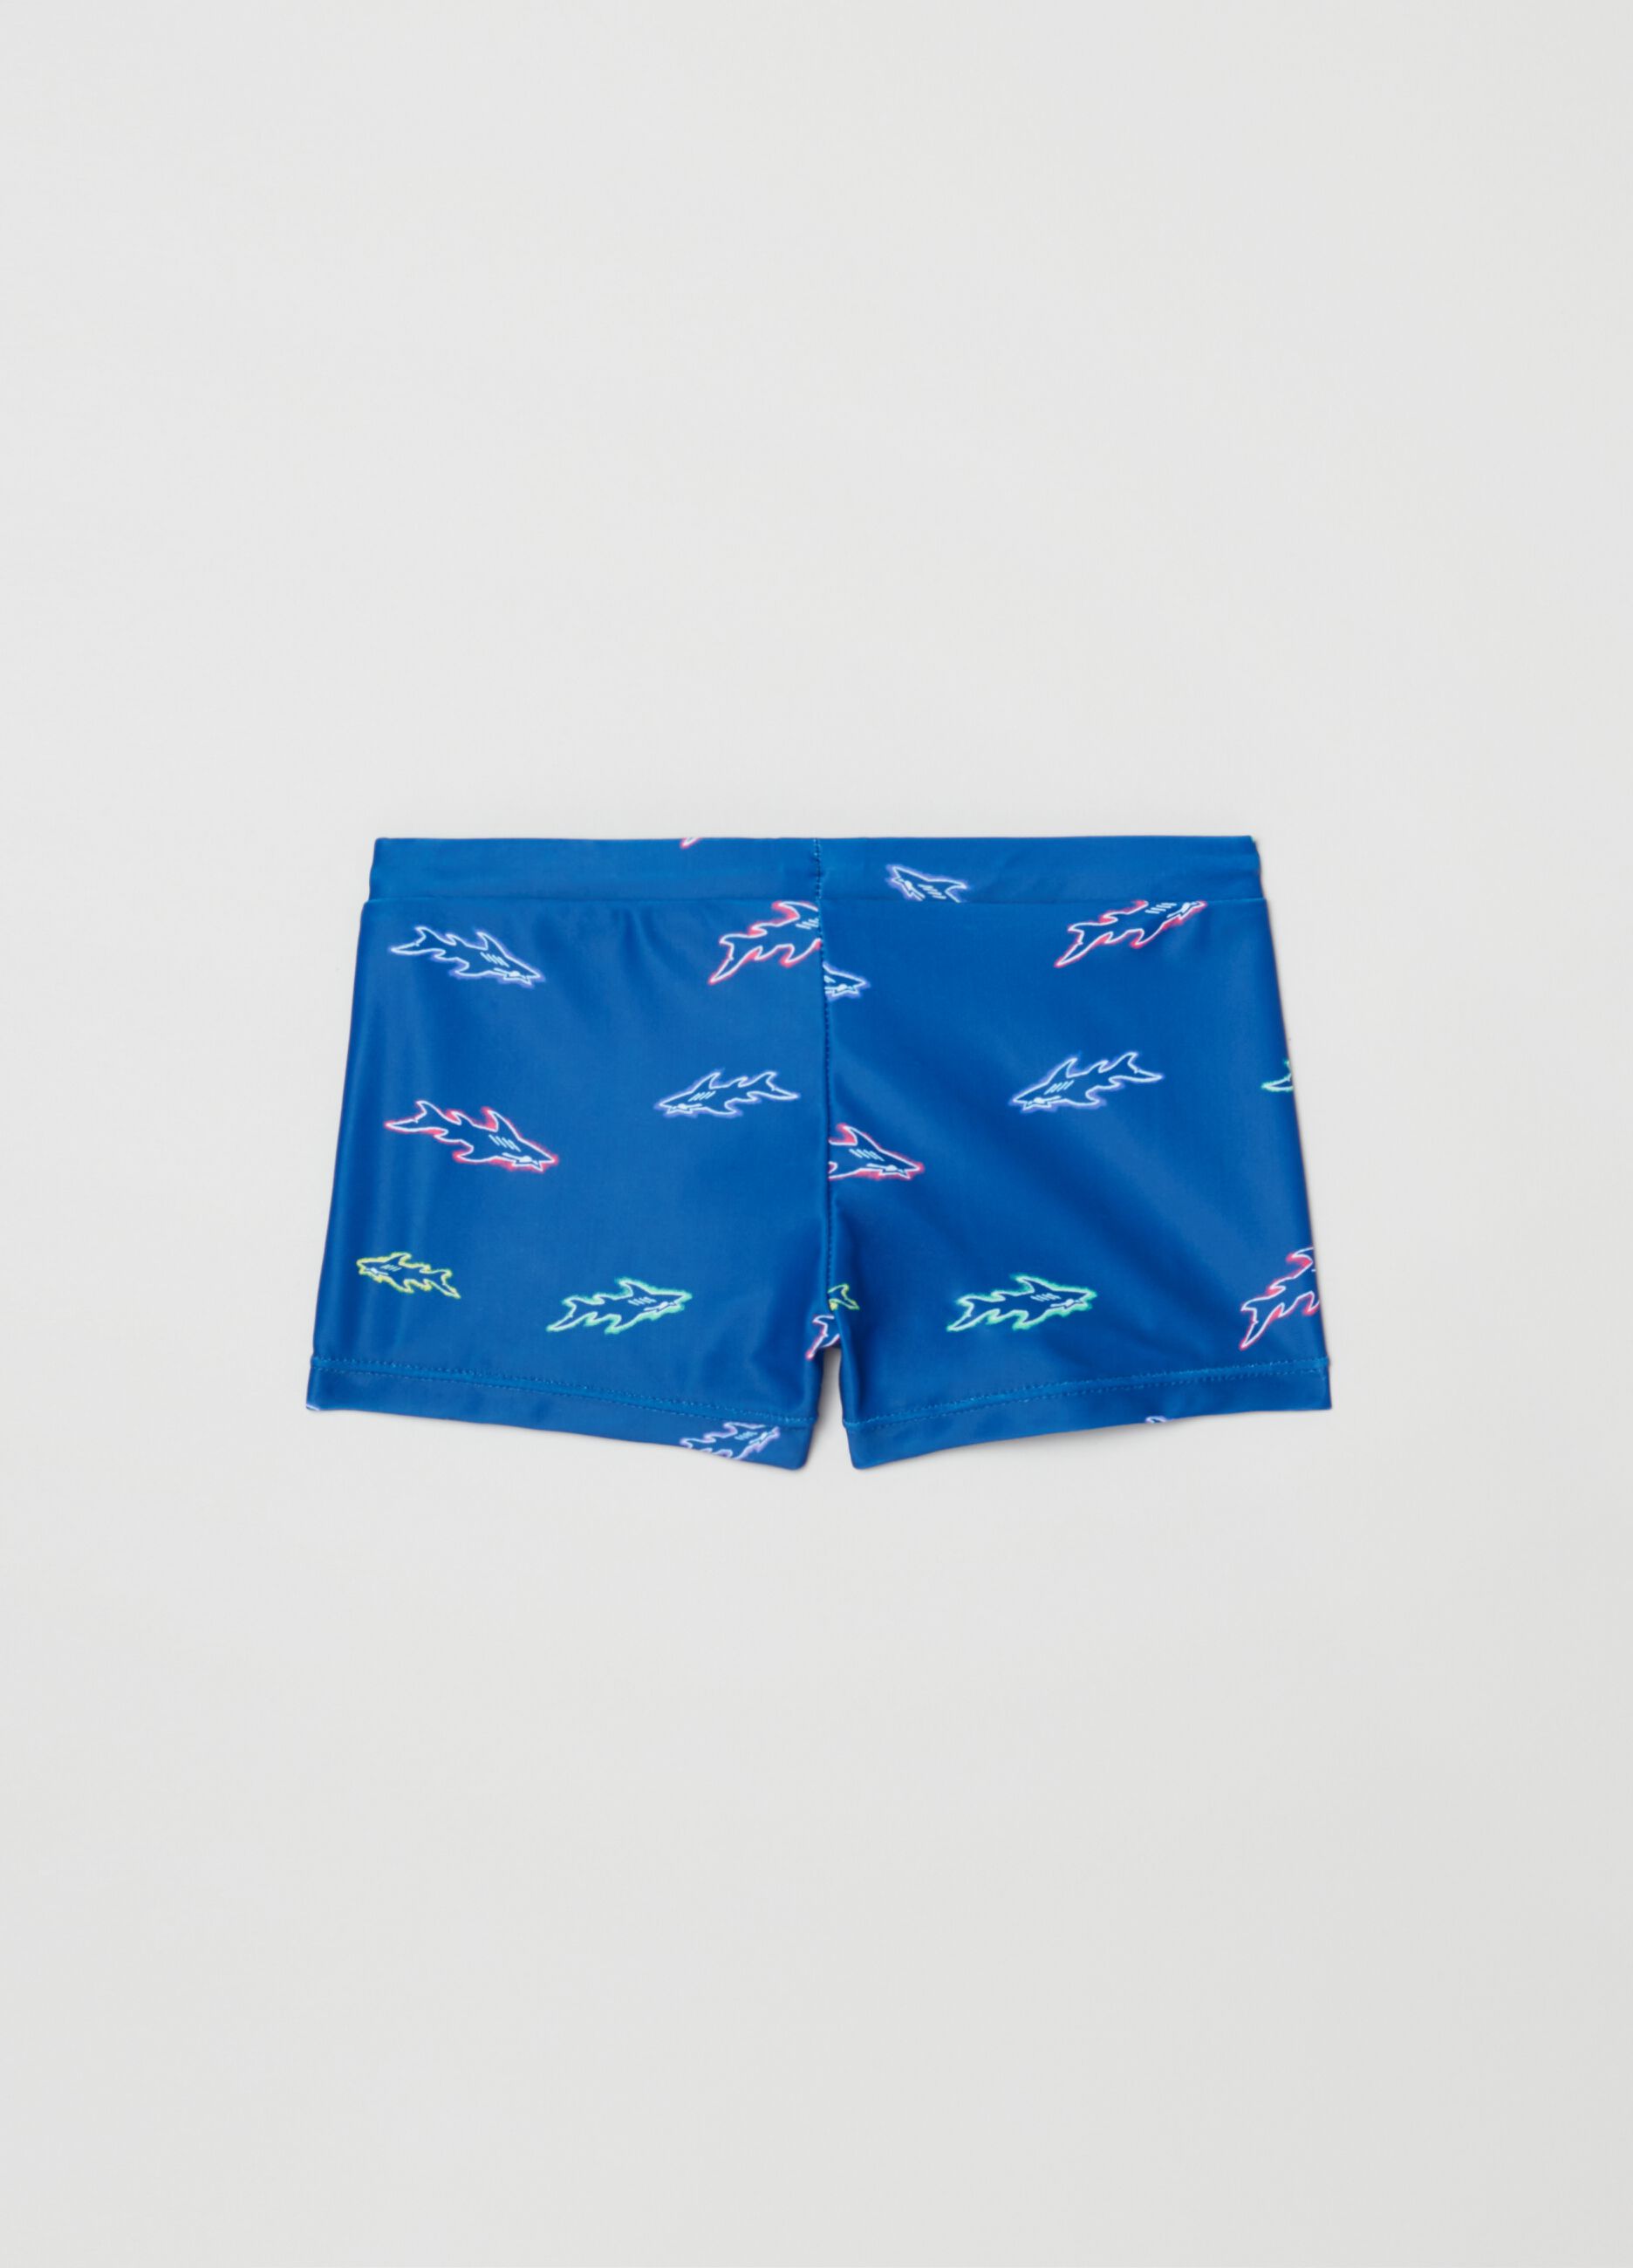 Maui and Sons swimming trunks